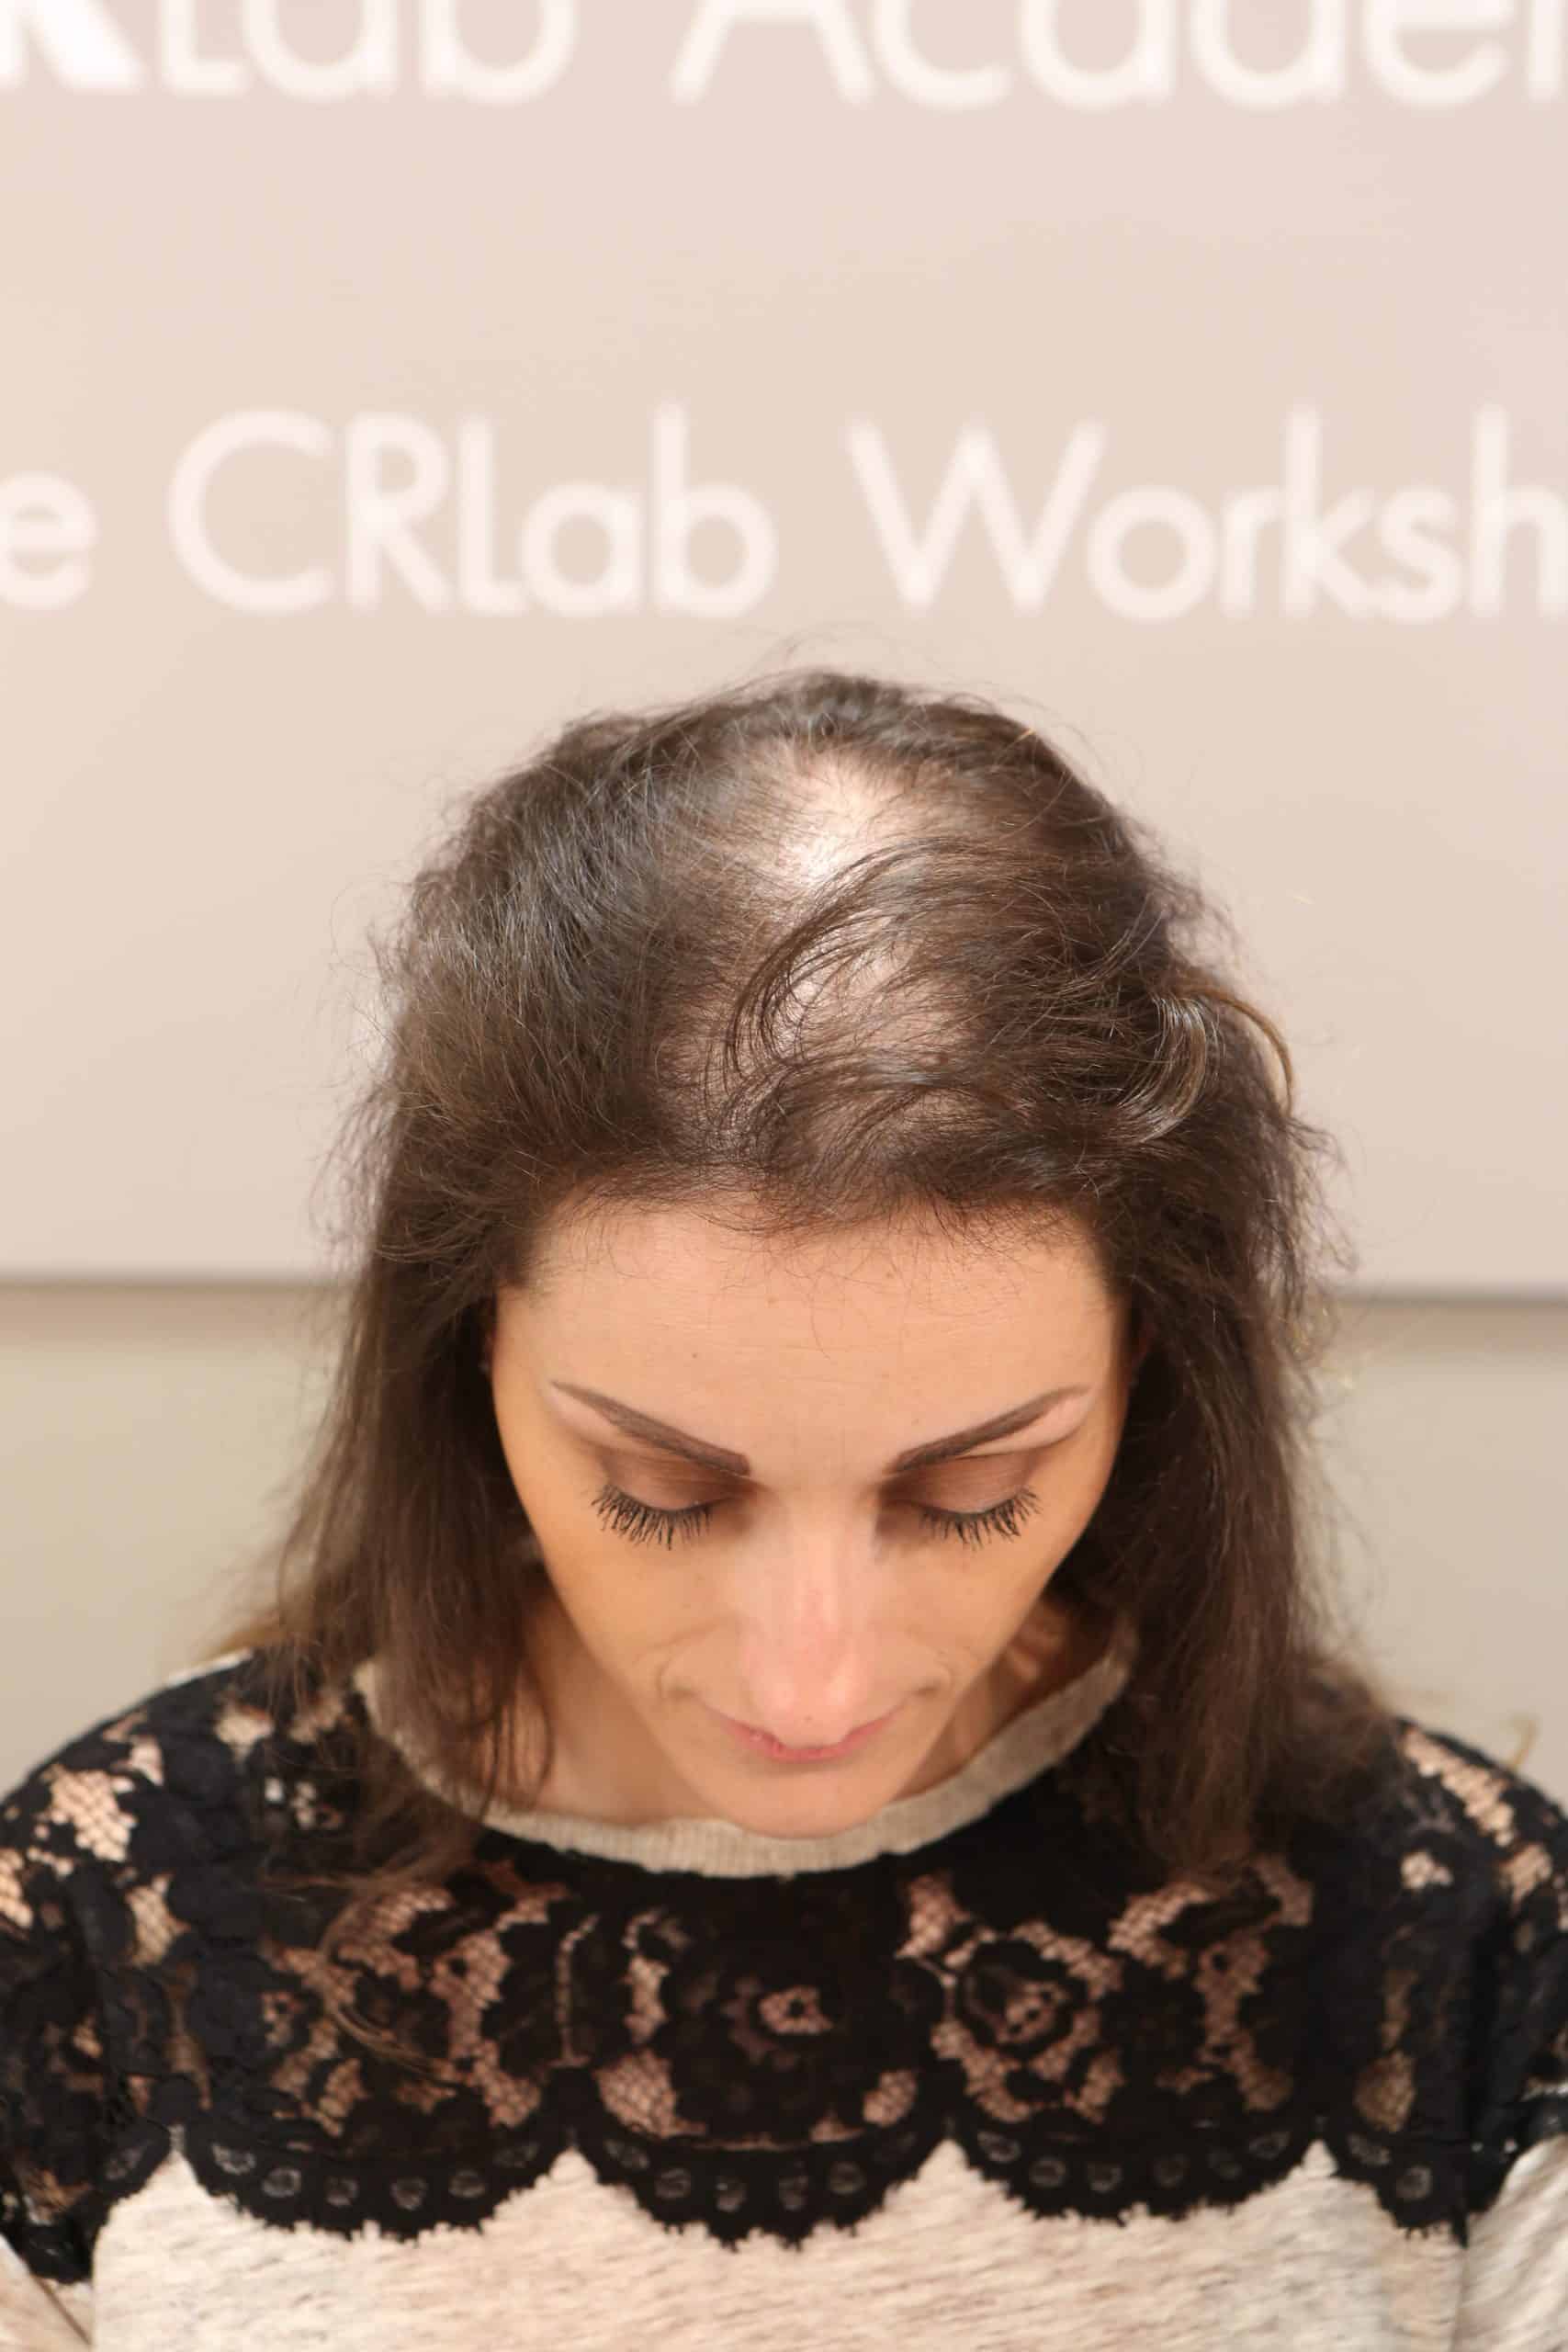 Woman has hair and scalp inspected by CRLab's scope